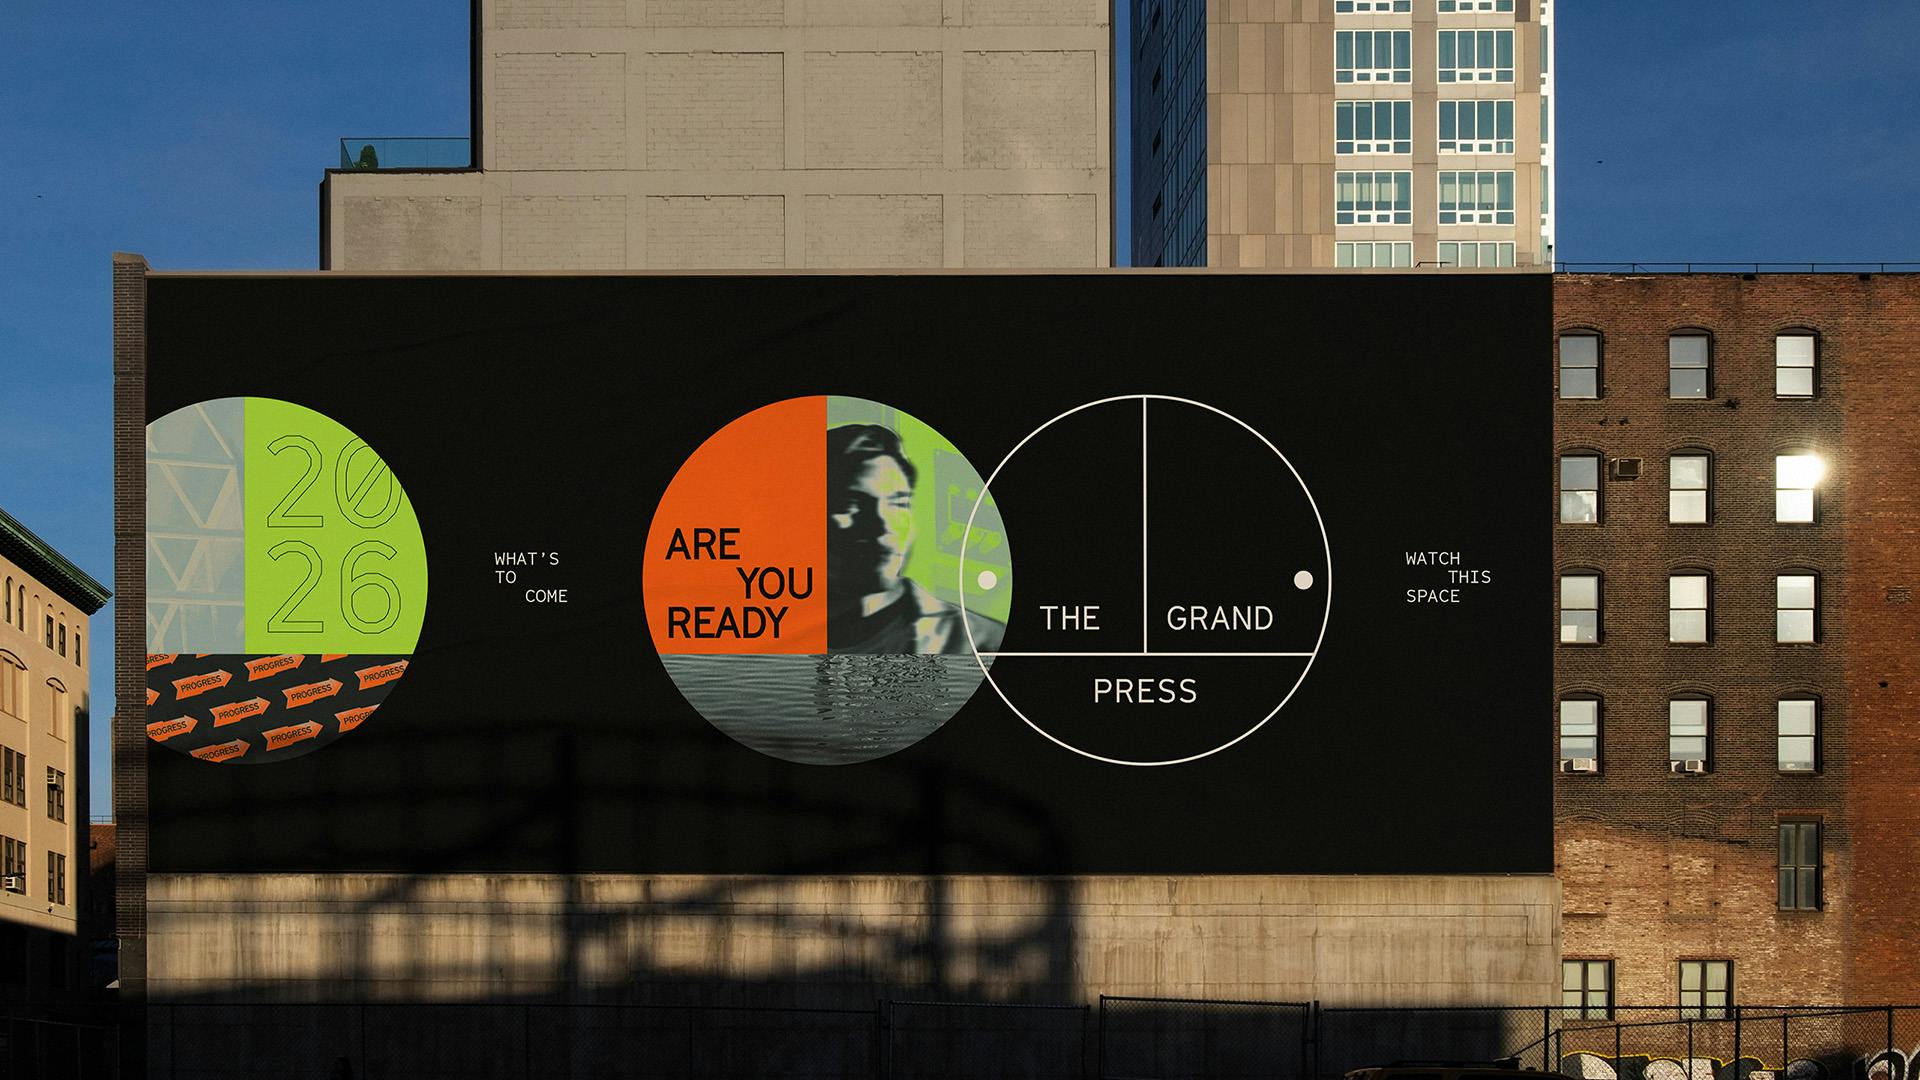 Image shows posters for the Grand Press attached to the side of a building. The posters feature the circular Grand Press logo, and another circular shape with the phrase 'Are you ready?' on the left